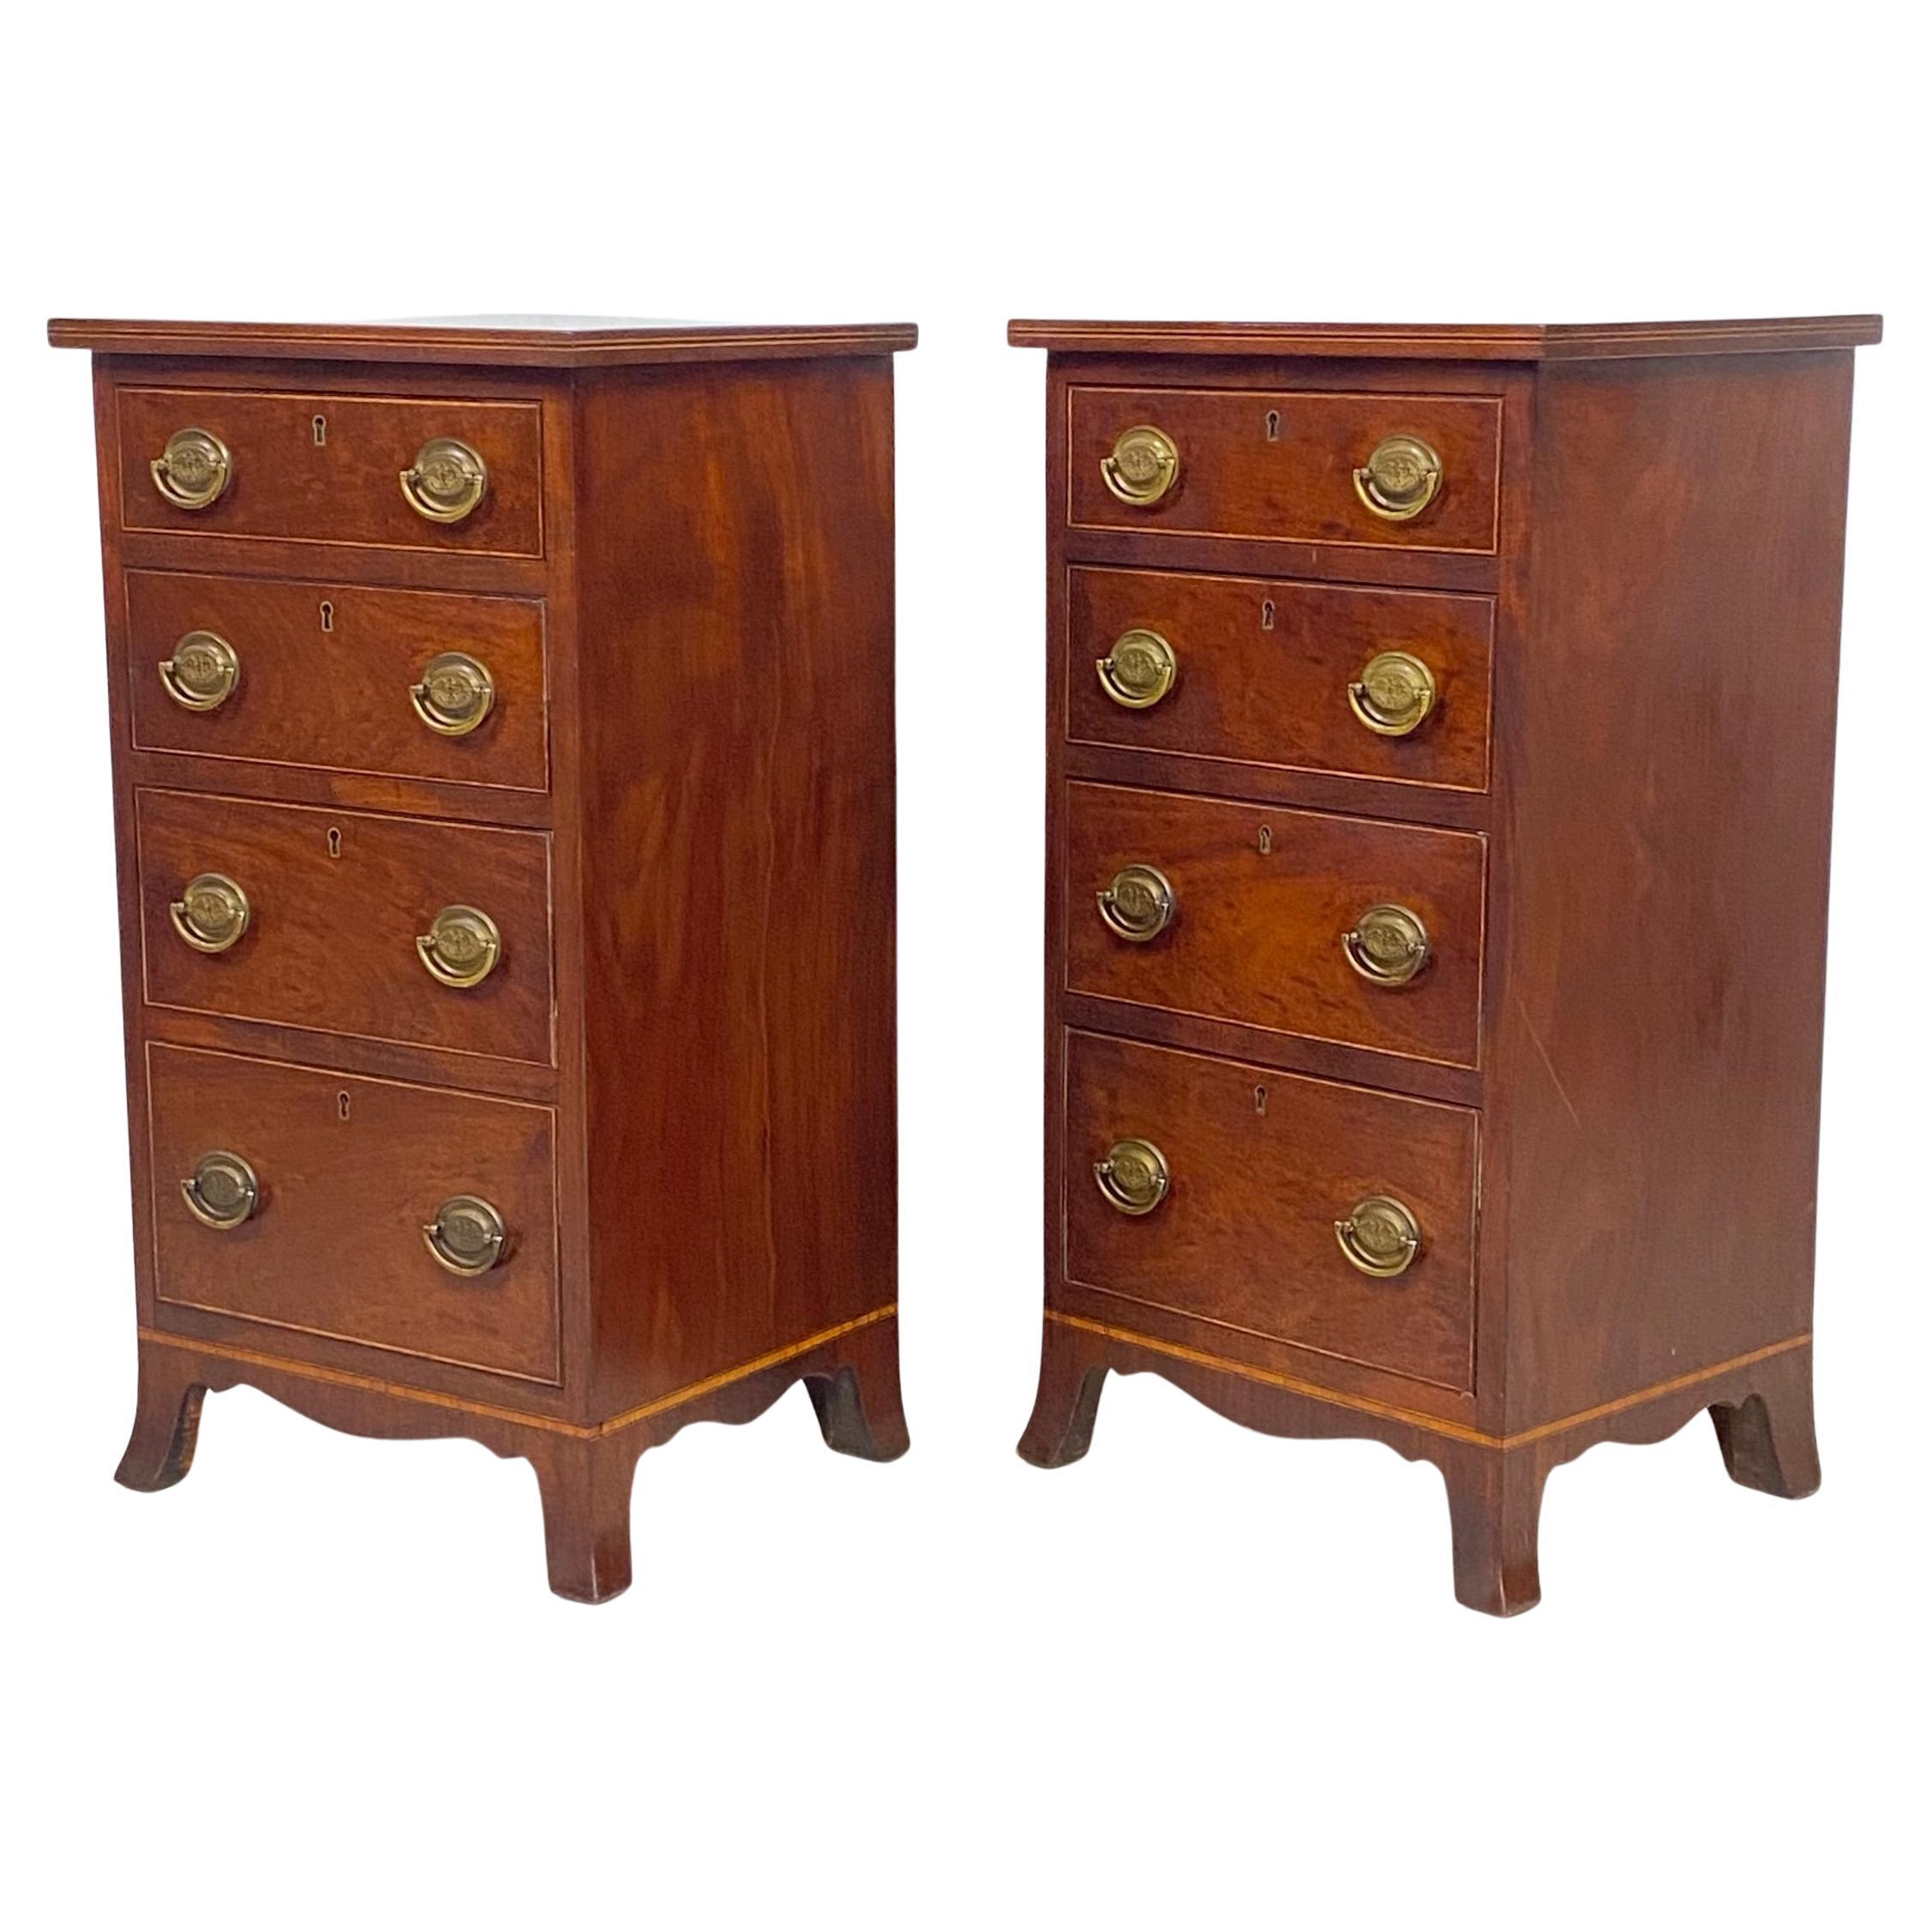 Pair of American Mahogany Bedside Cabinets Chests, 19th Century